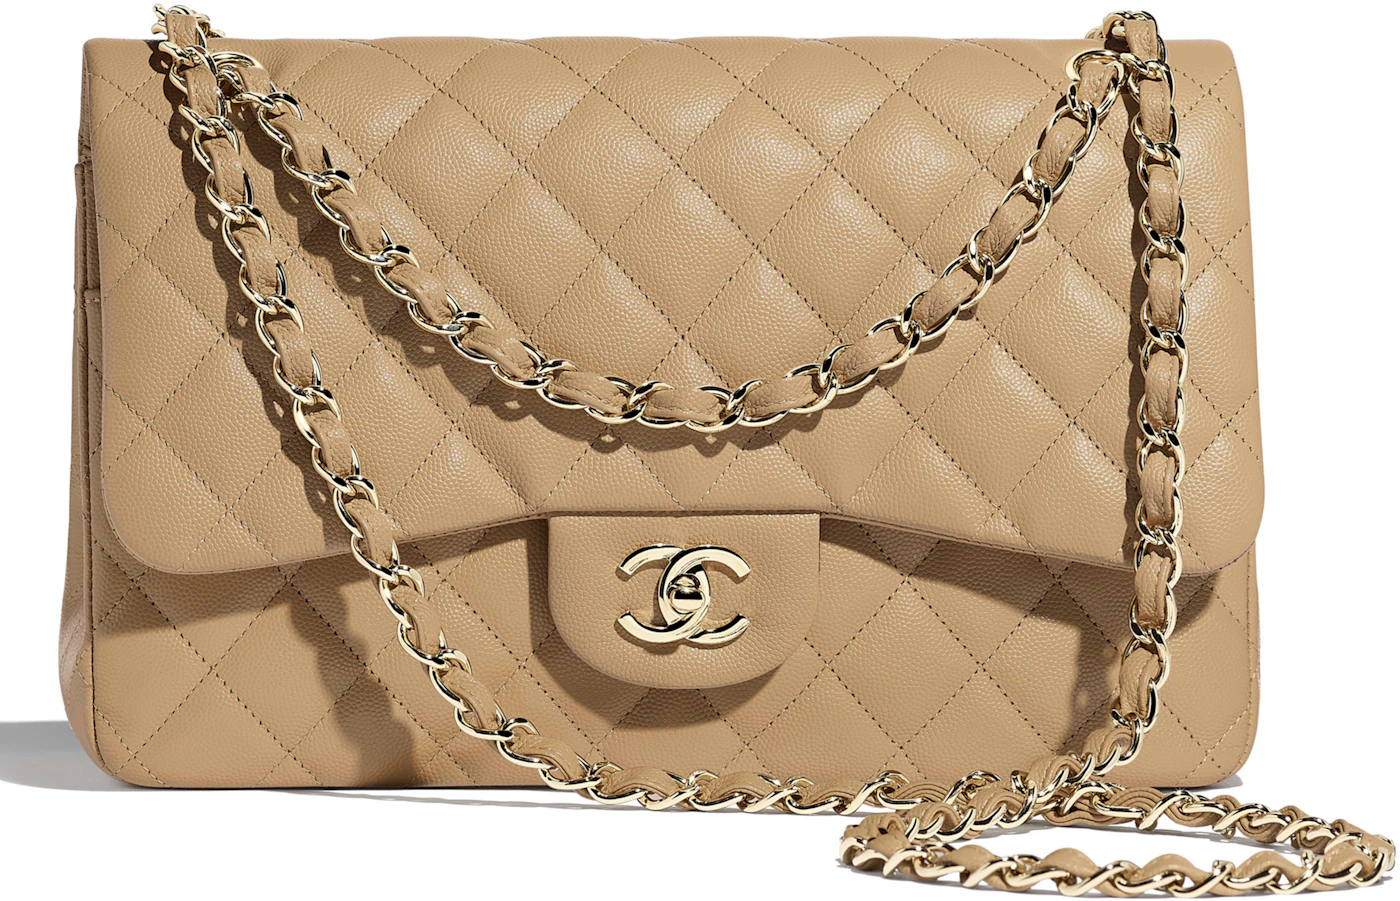 Chanel Classic Handbag Quilted Beige in Grained Calfskin with - US